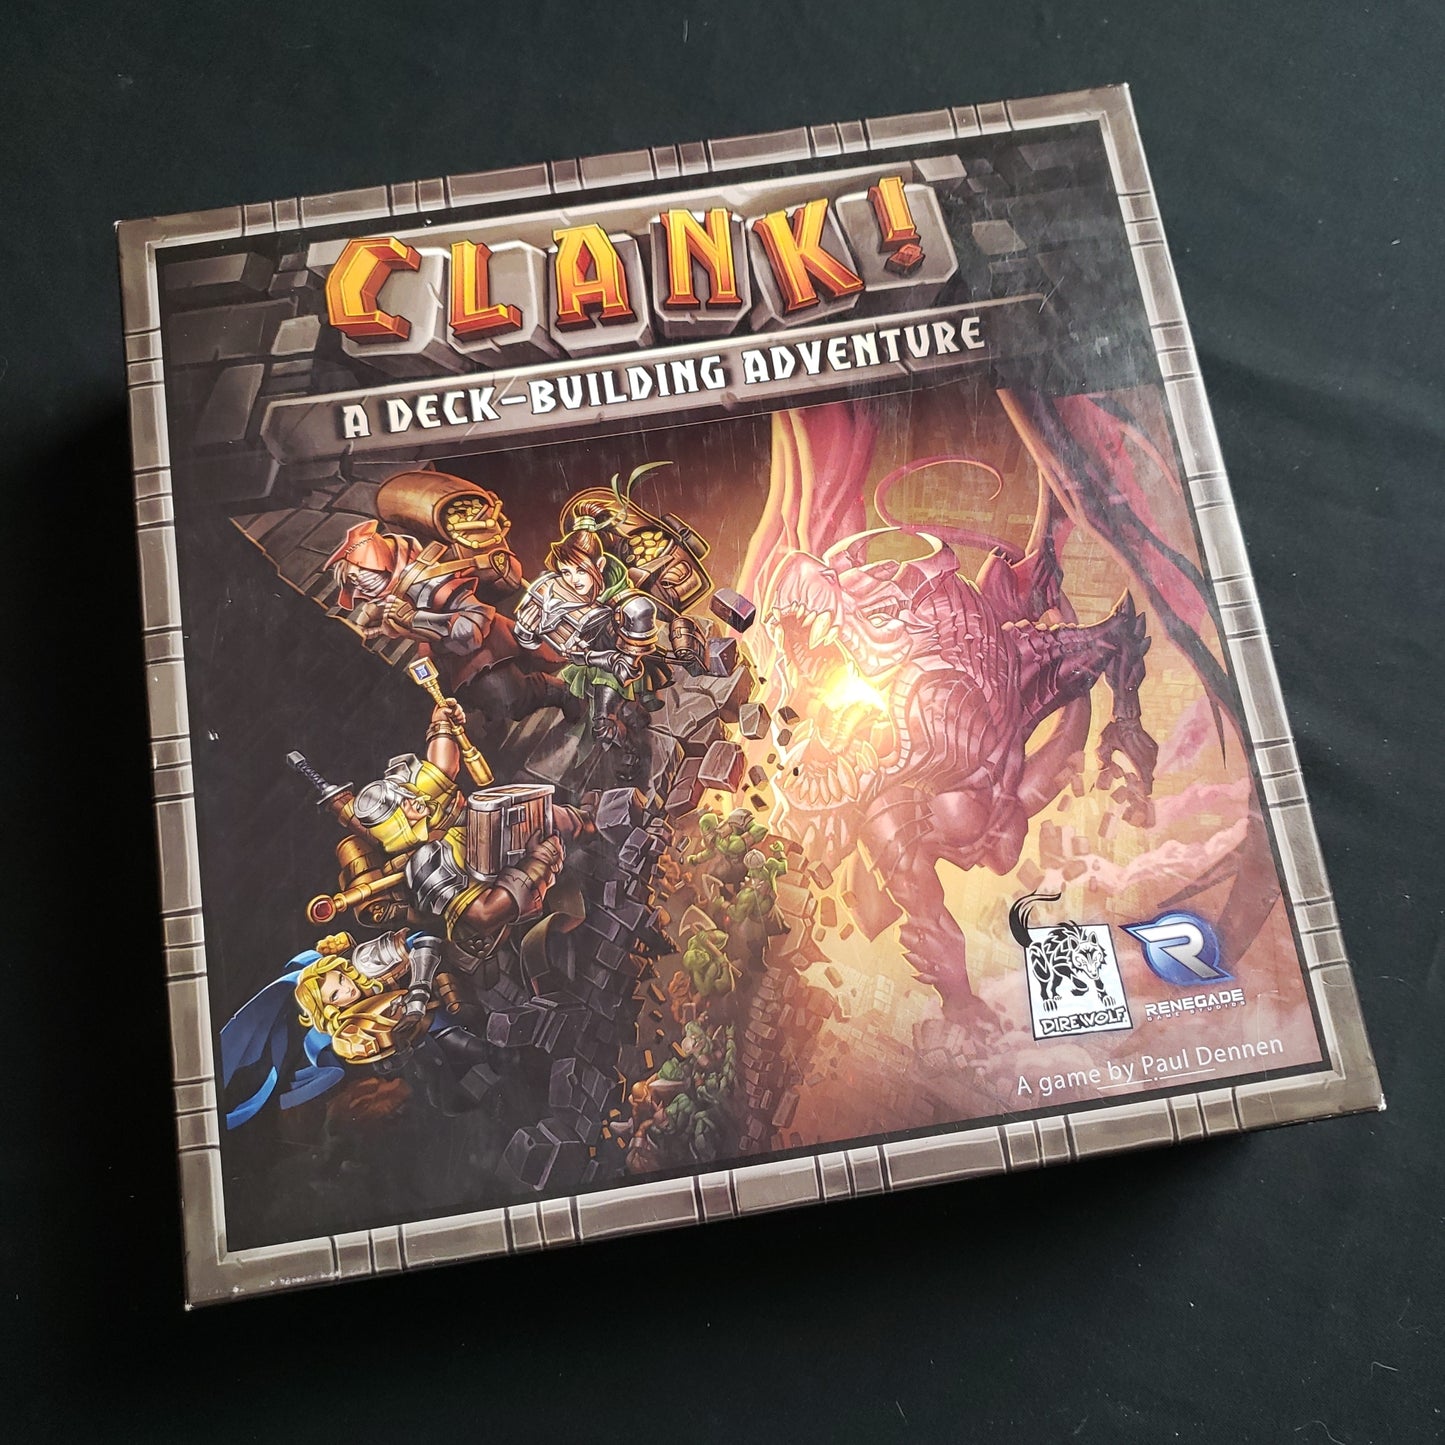 Image shows the front cover of the box of the Clank! board game